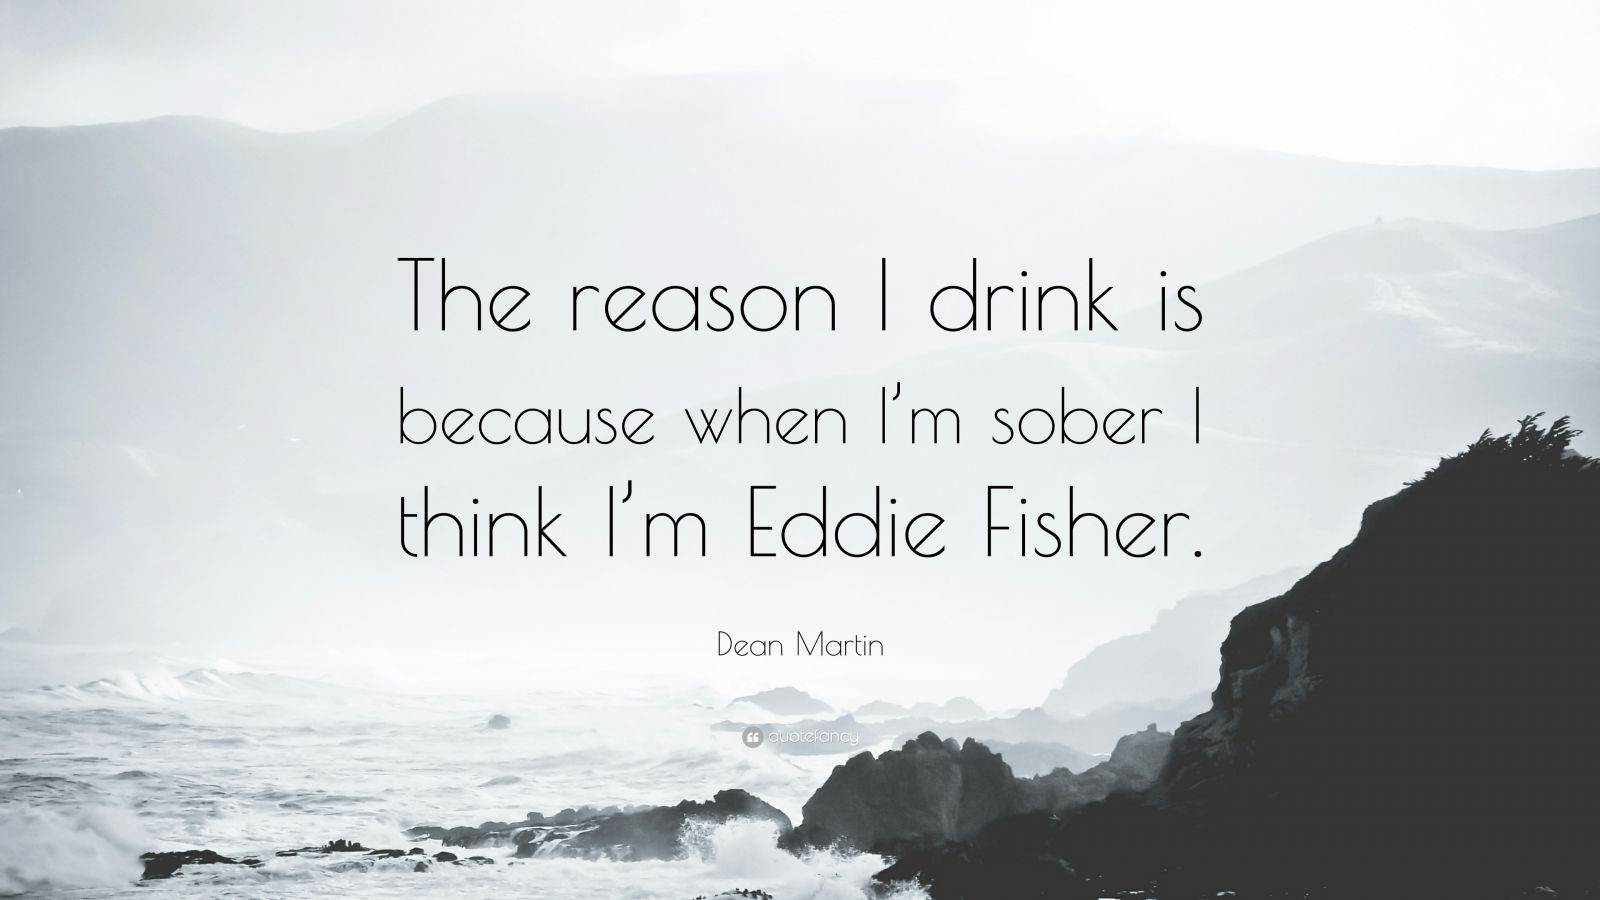 Dean Martin Quote: “The reason I drink is because when I’m sober I think I’m Eddie Fisher.”